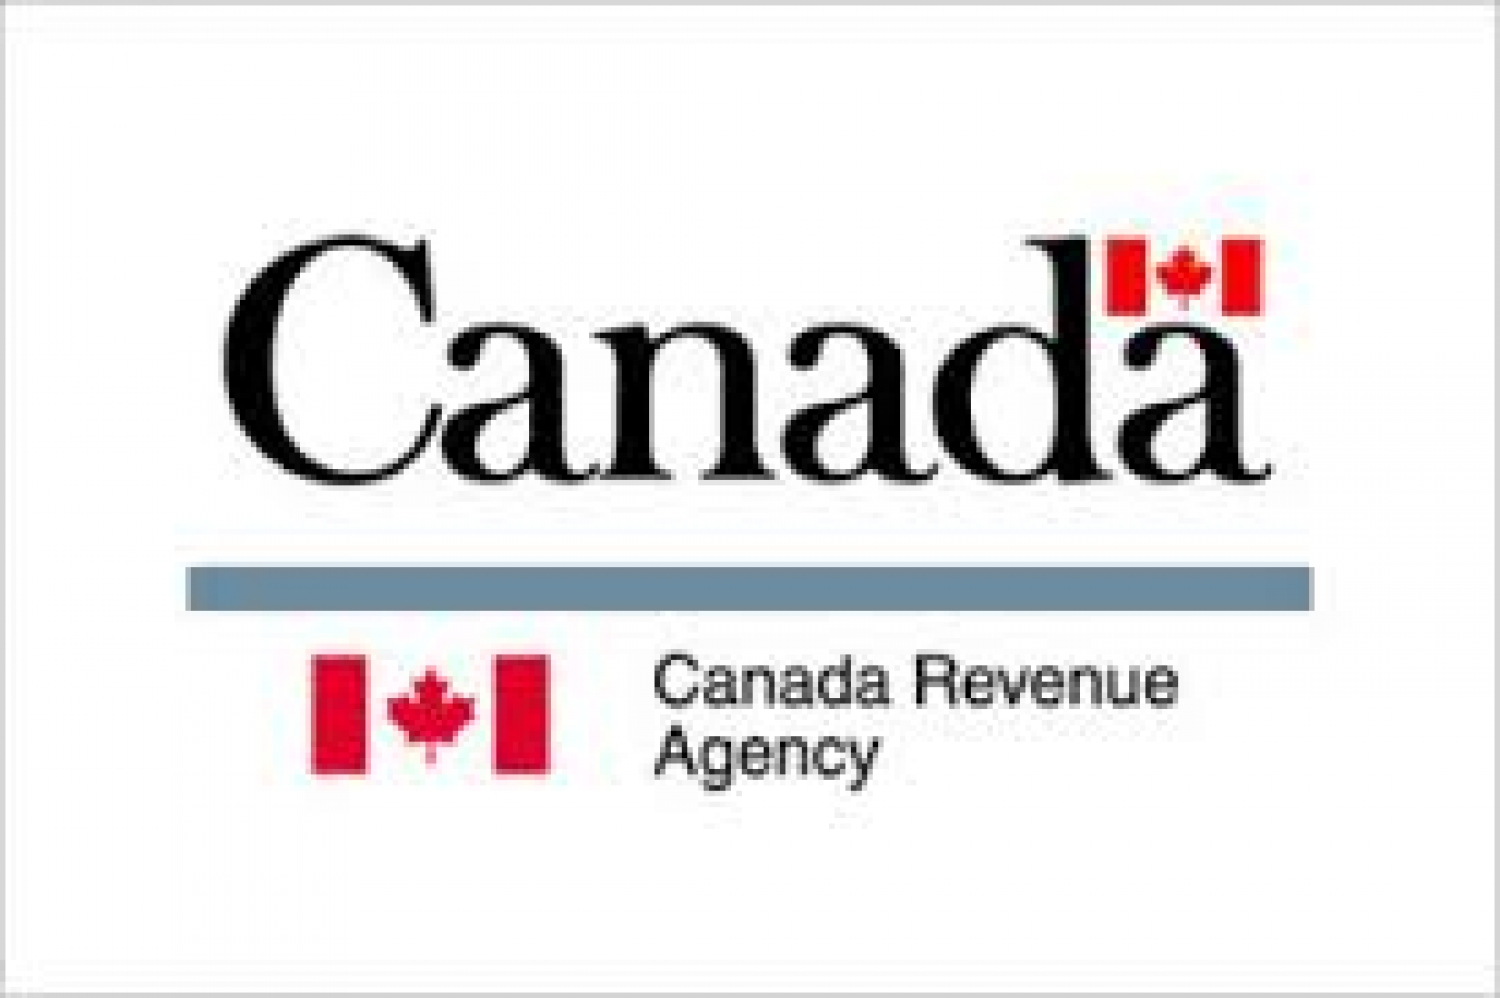 New Program - Make Sure You Know About All The Benefits and Credits You are Entitled To - by Canada Revenue Agency